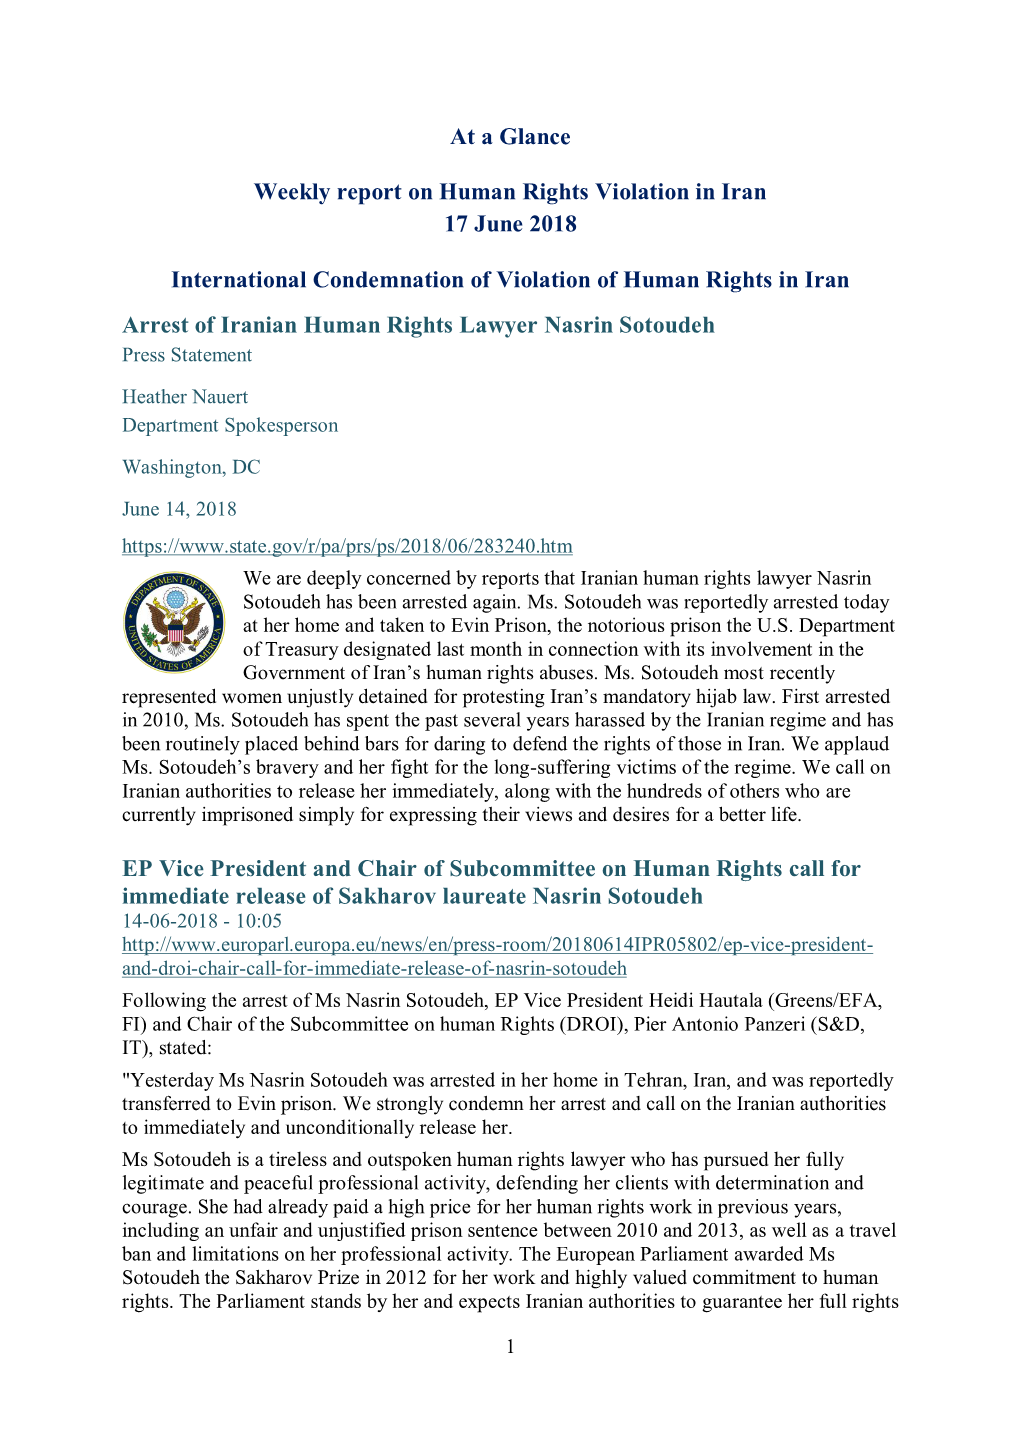 At a Glance Weekly Report on Human Rights Violation in Iran 17 June